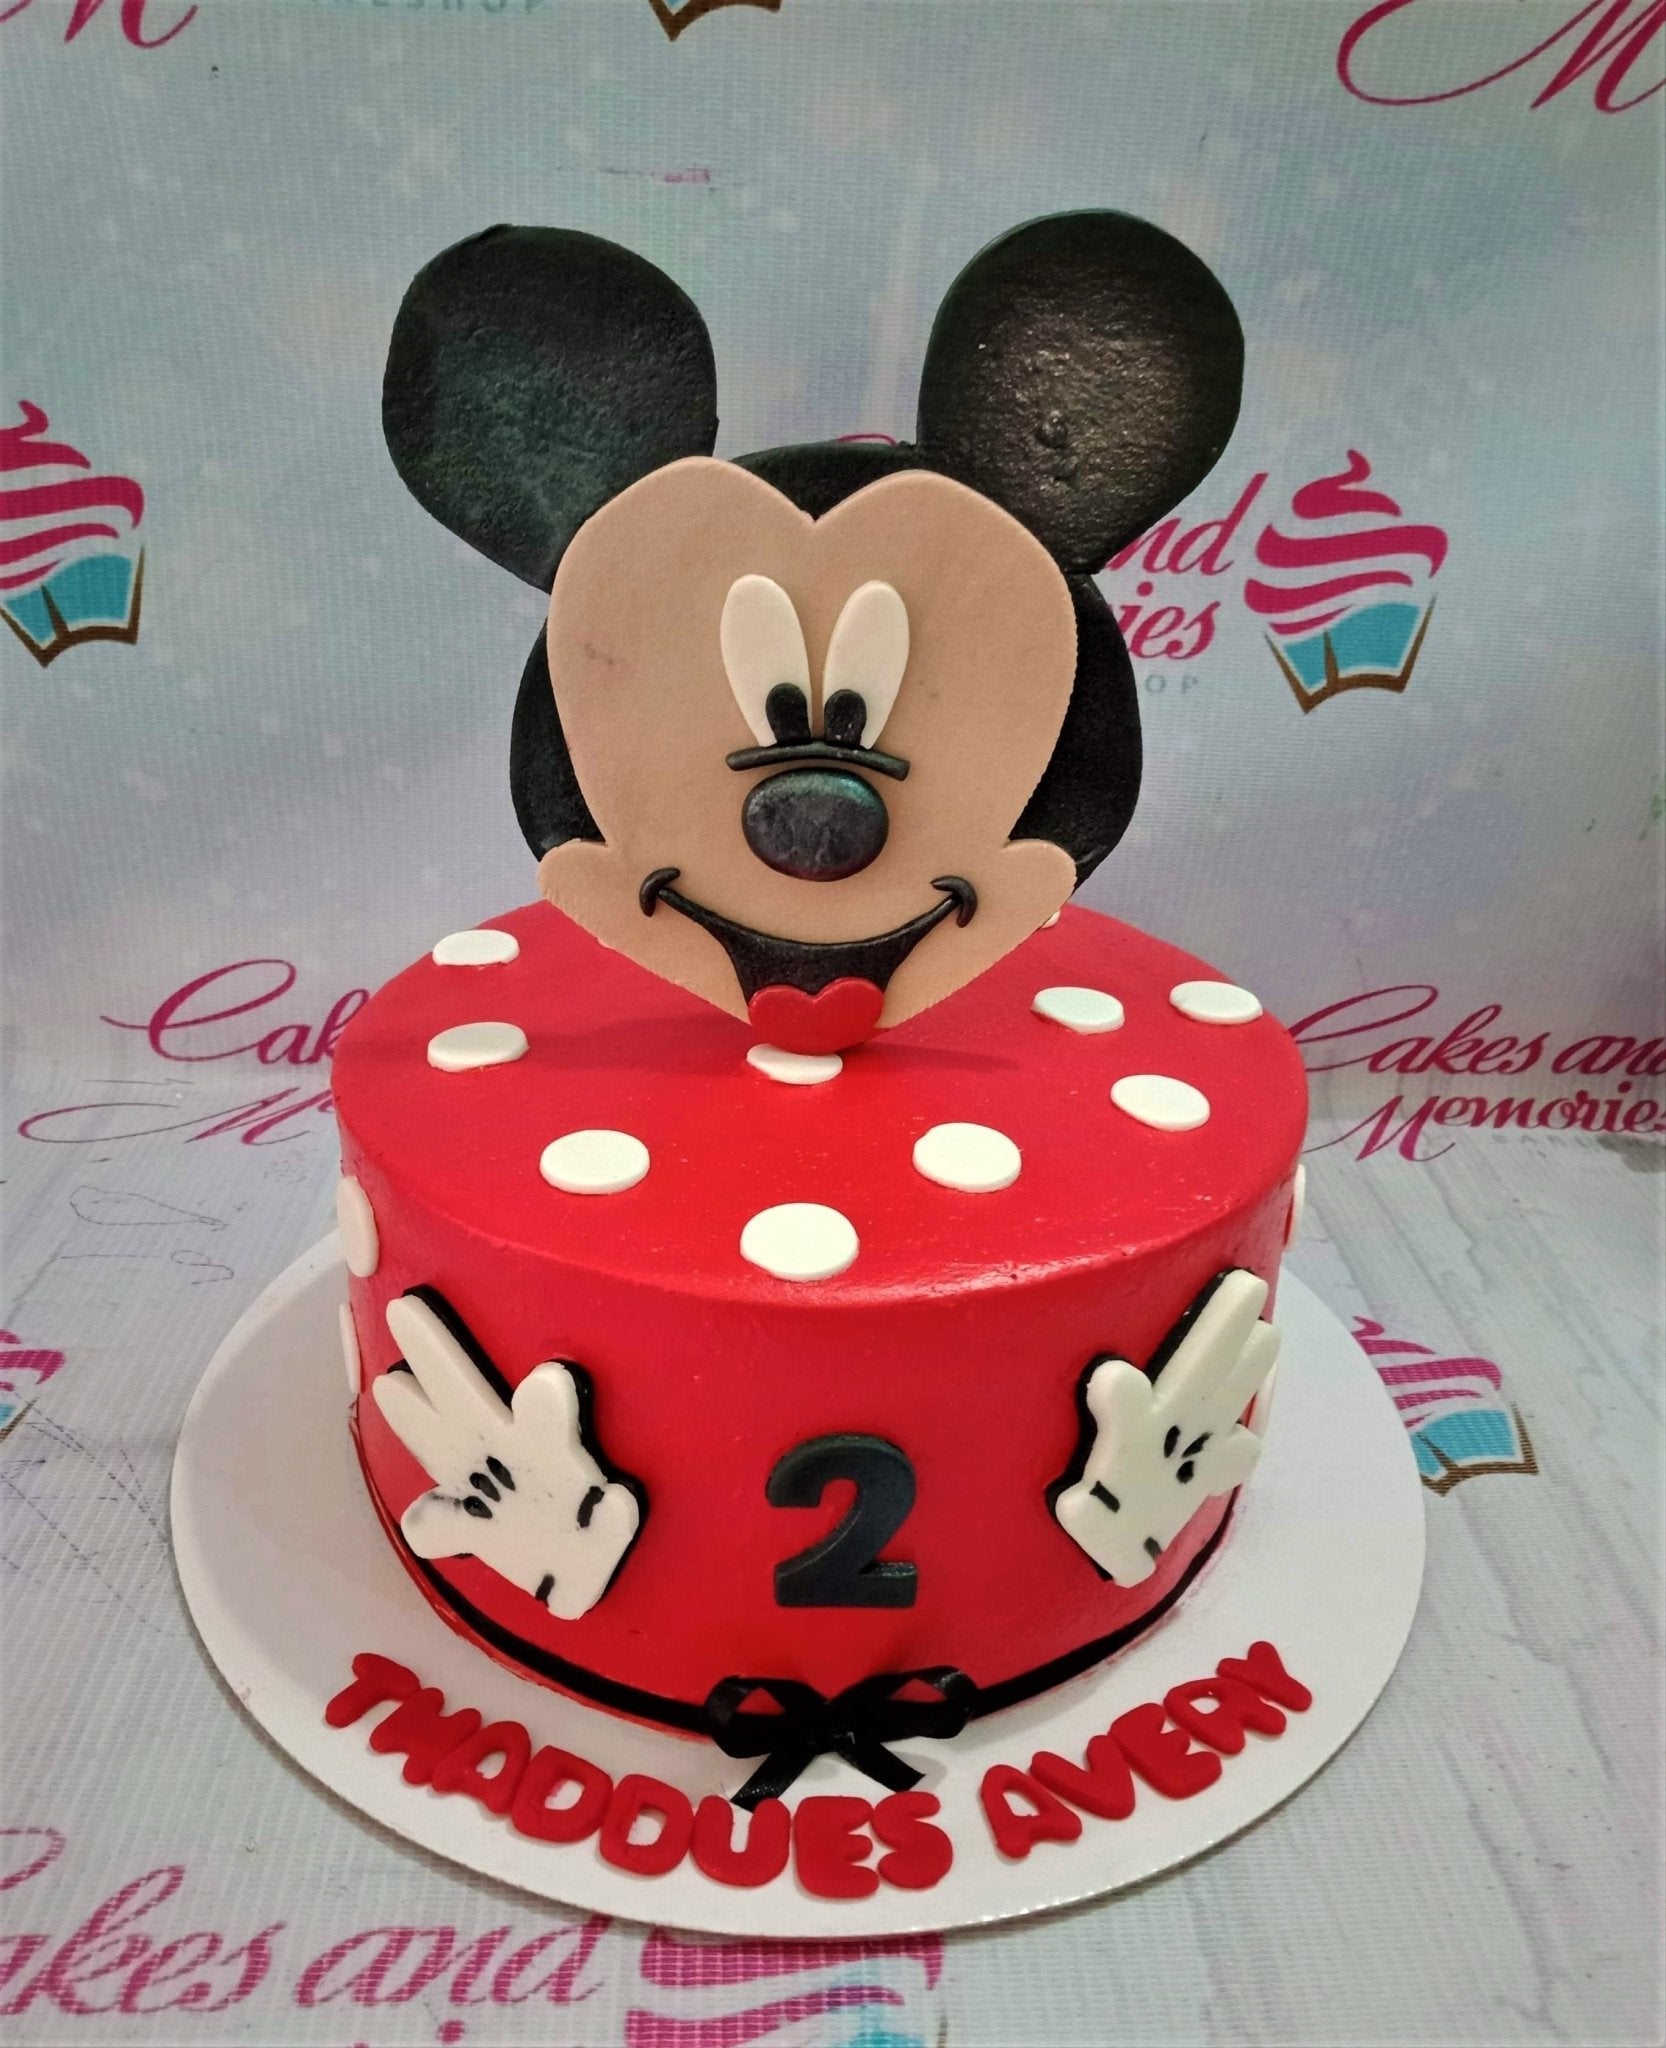 Send happy birthday mickey mouse photo cake online by GiftJaipur in  Rajasthan